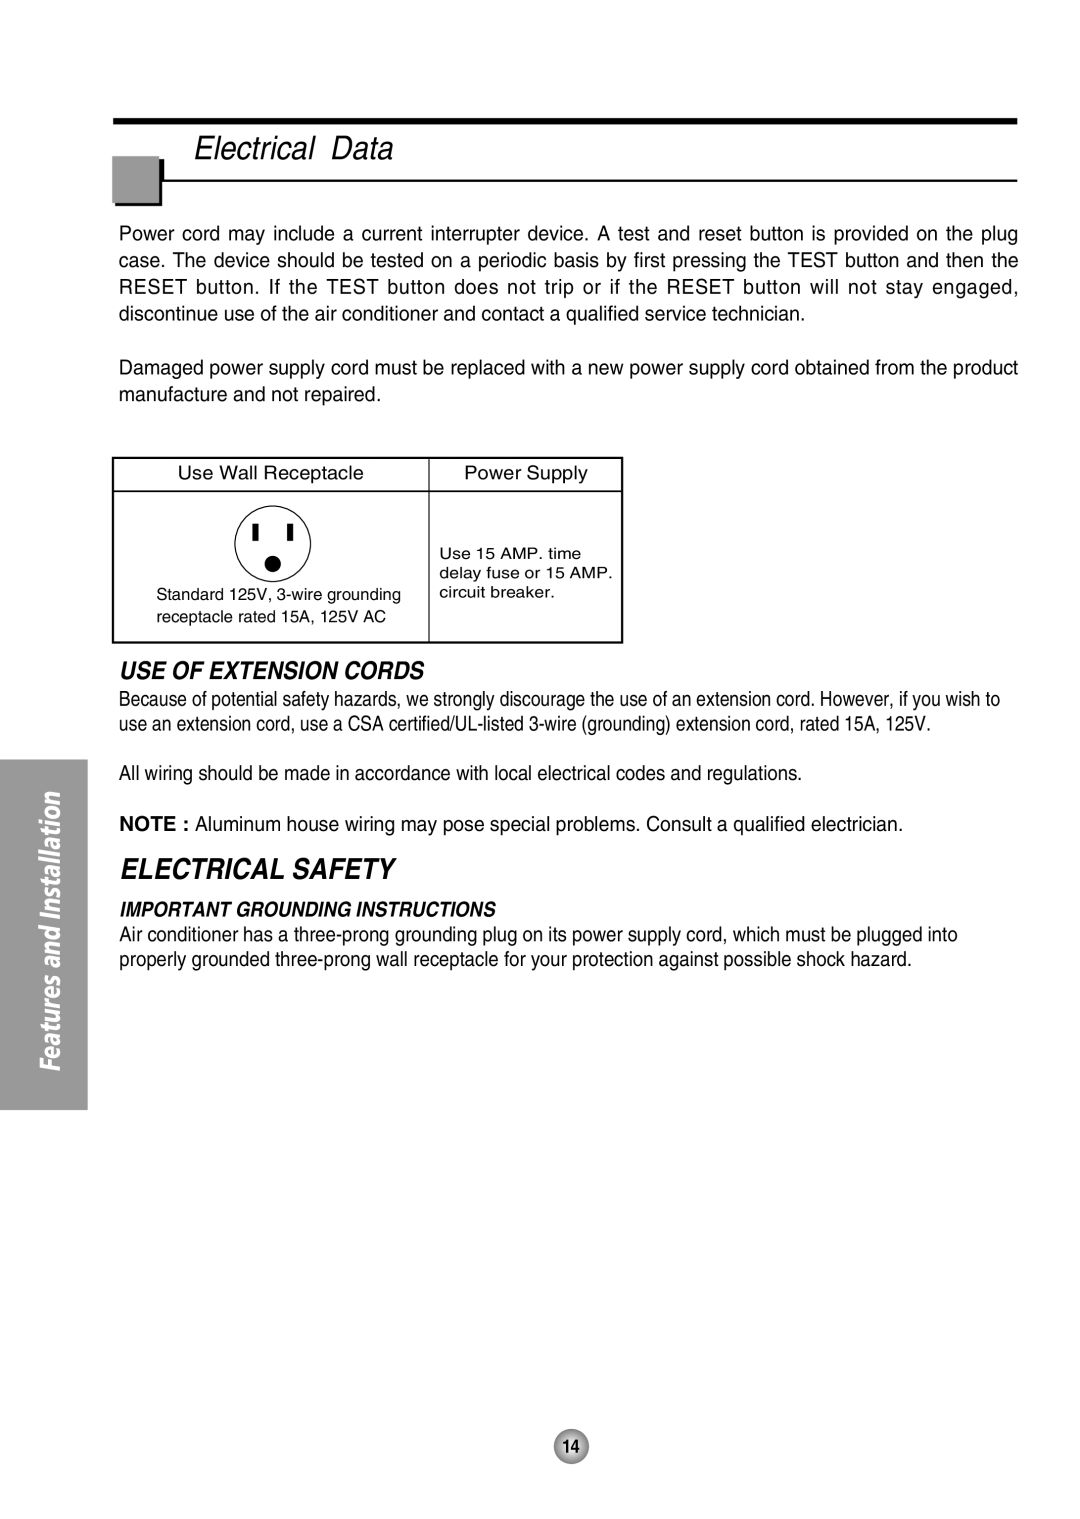 Panasonic CW-XC65HU manual Electrical Data, Use Of Extension Cords, Important Grounding Instructions, Electrical Safety 